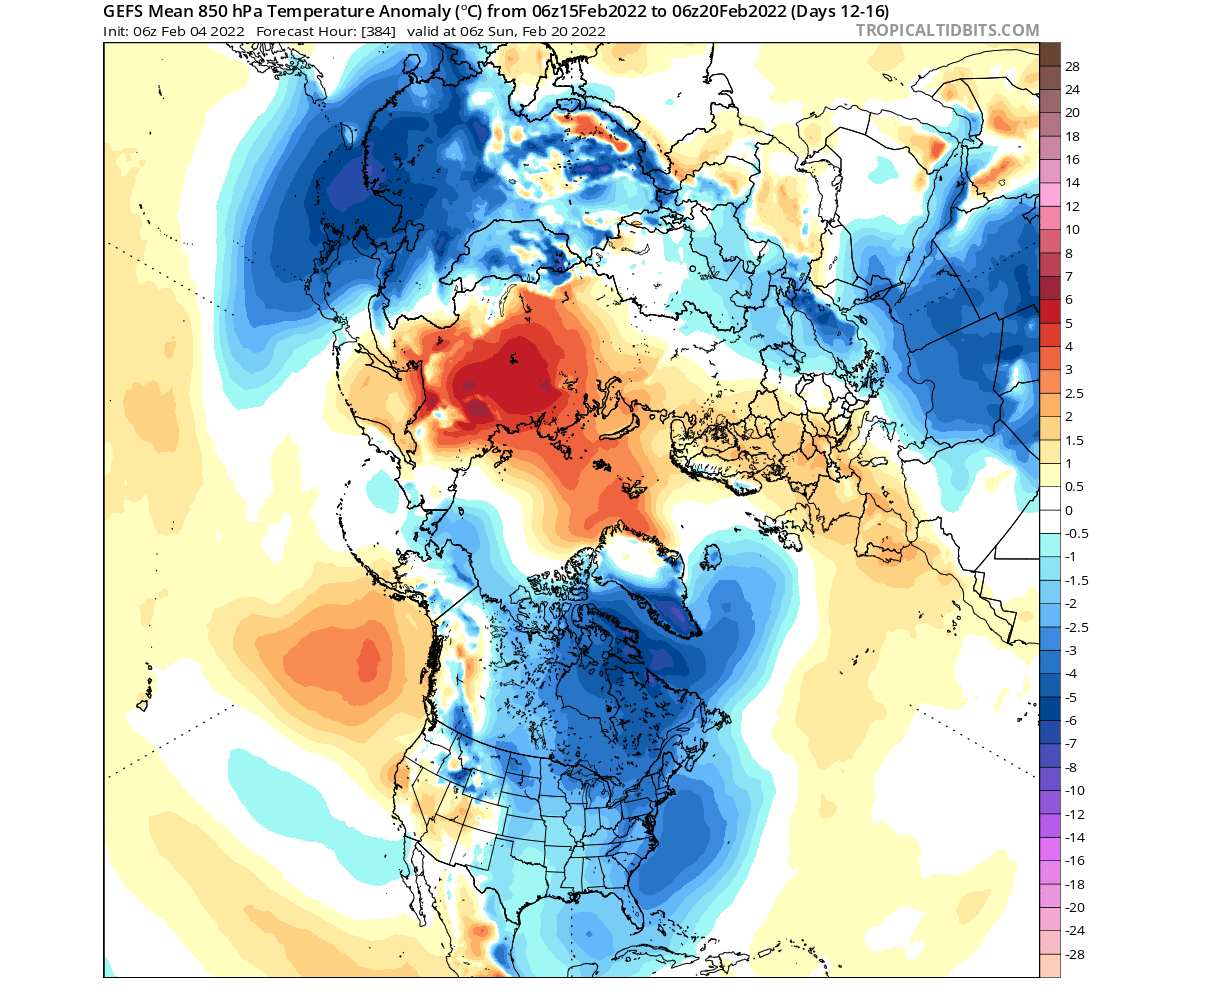 winter-weather-forecast-polar-vortex-february-2022-united-states-temperature-anomaly-late-month-cold-pattern-development